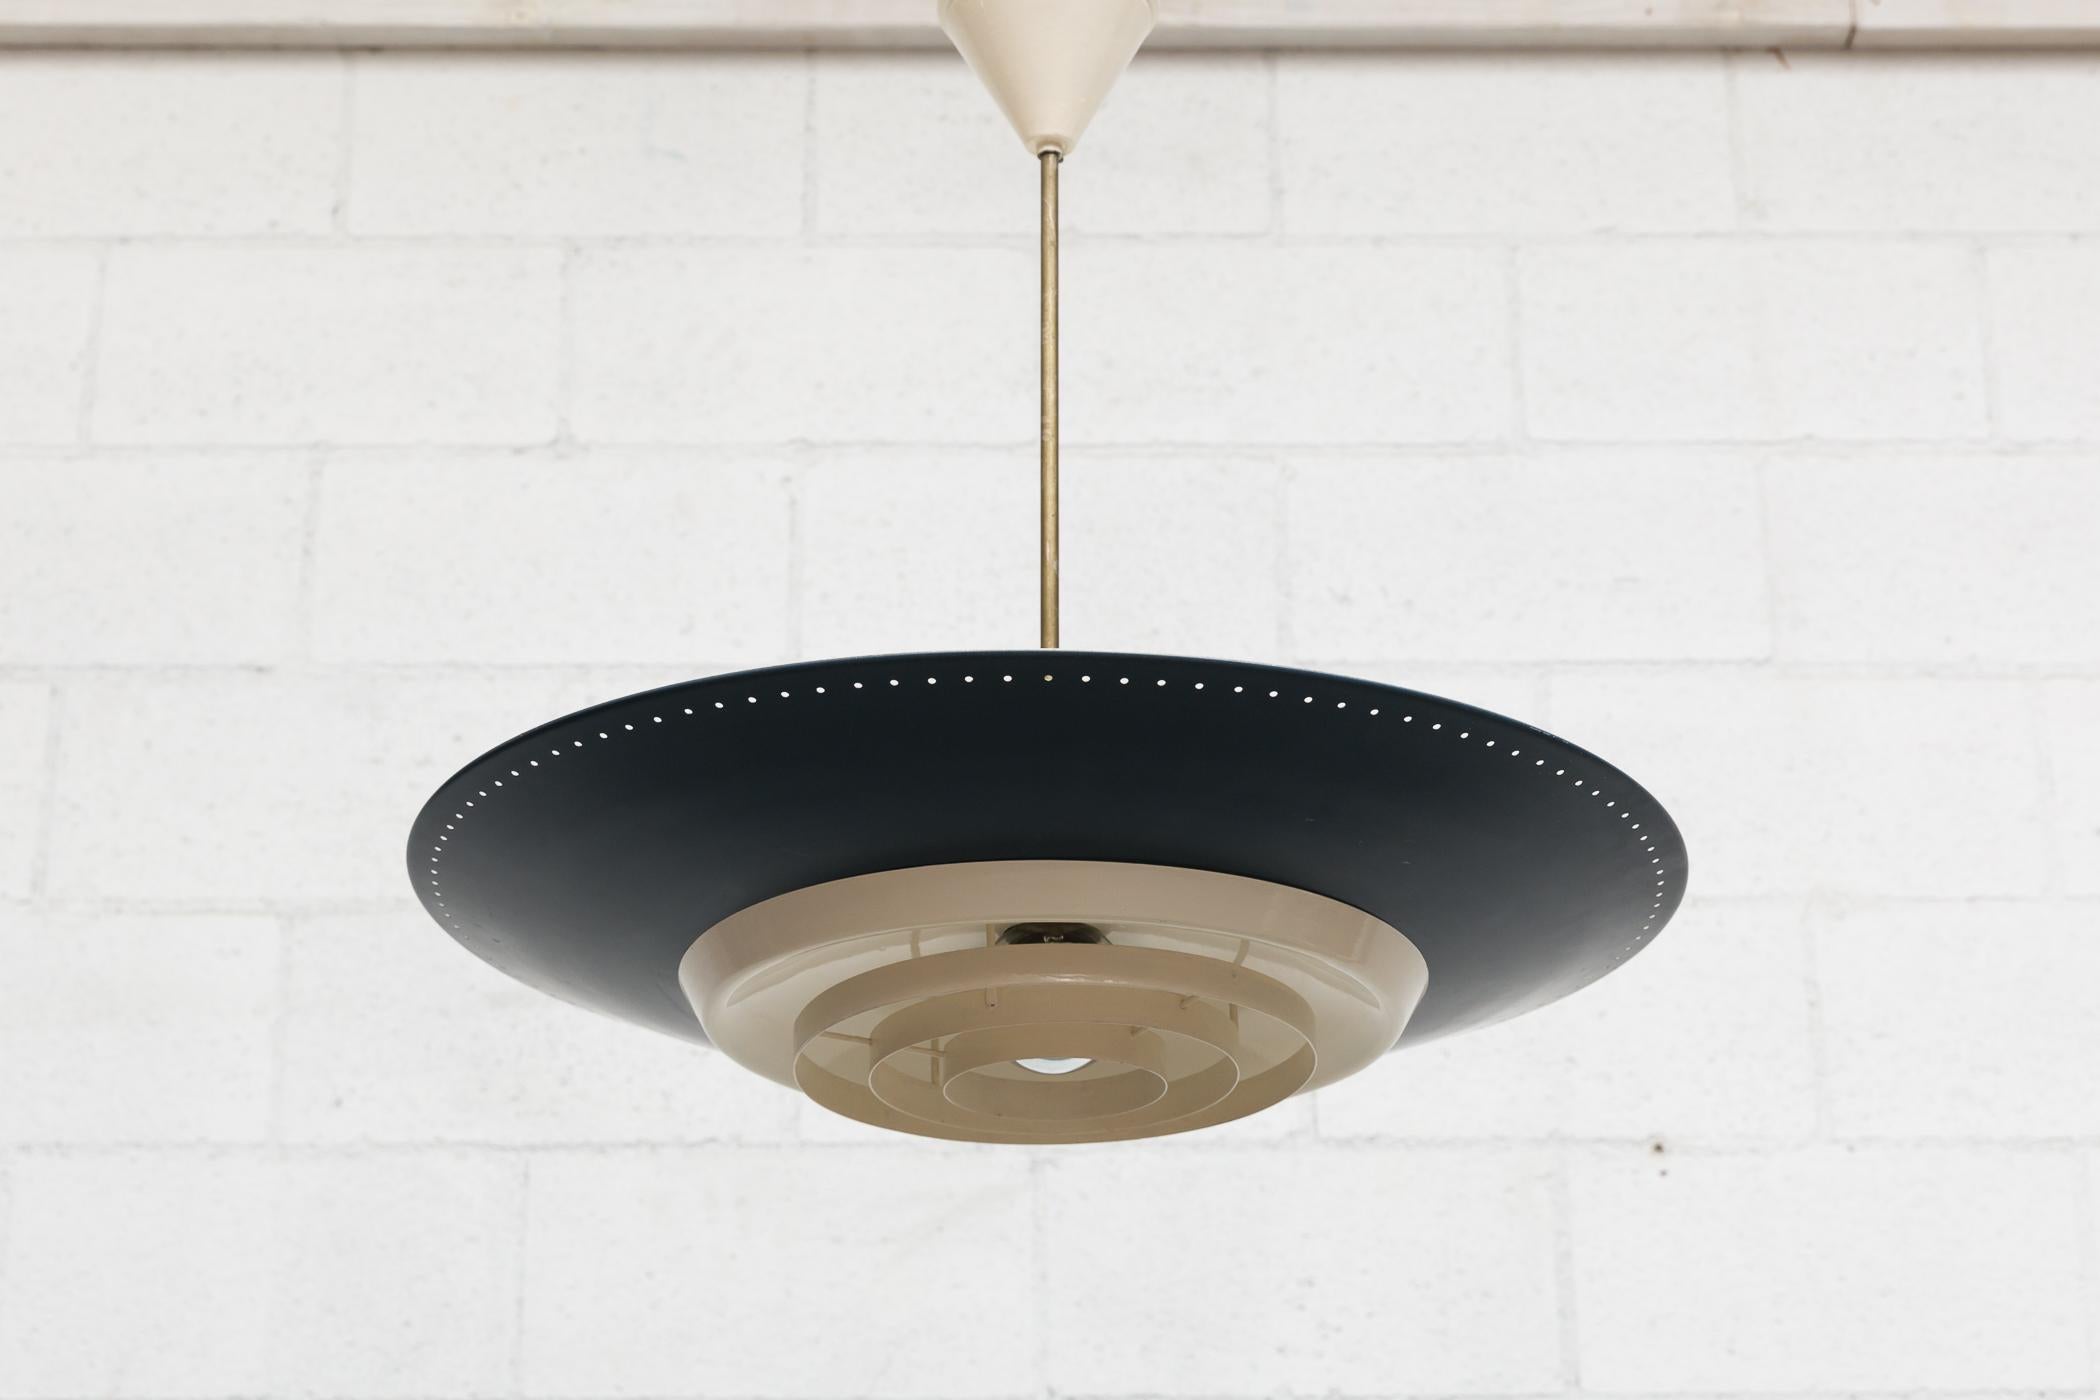 Original 1950s industrial enameled metal rondelle ceiling pendant. Deep blue enameled spun aluminium shade with perforated edge and bone white accents. Triple light sockets for uplighting and a single spot for below with triple enameled metal ring